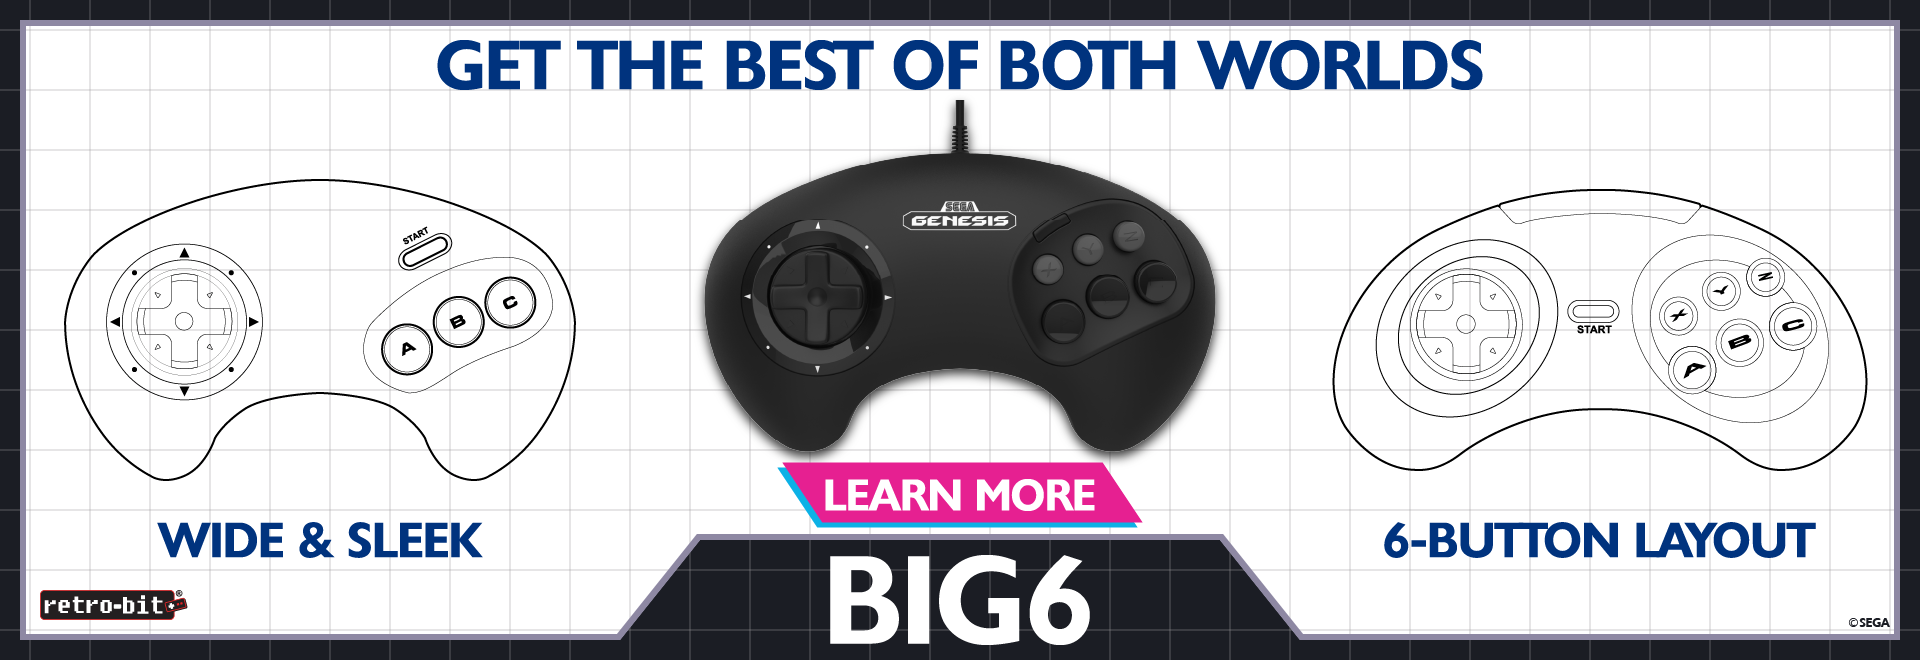 The BIG6 Controller - Get the best of both worlds!